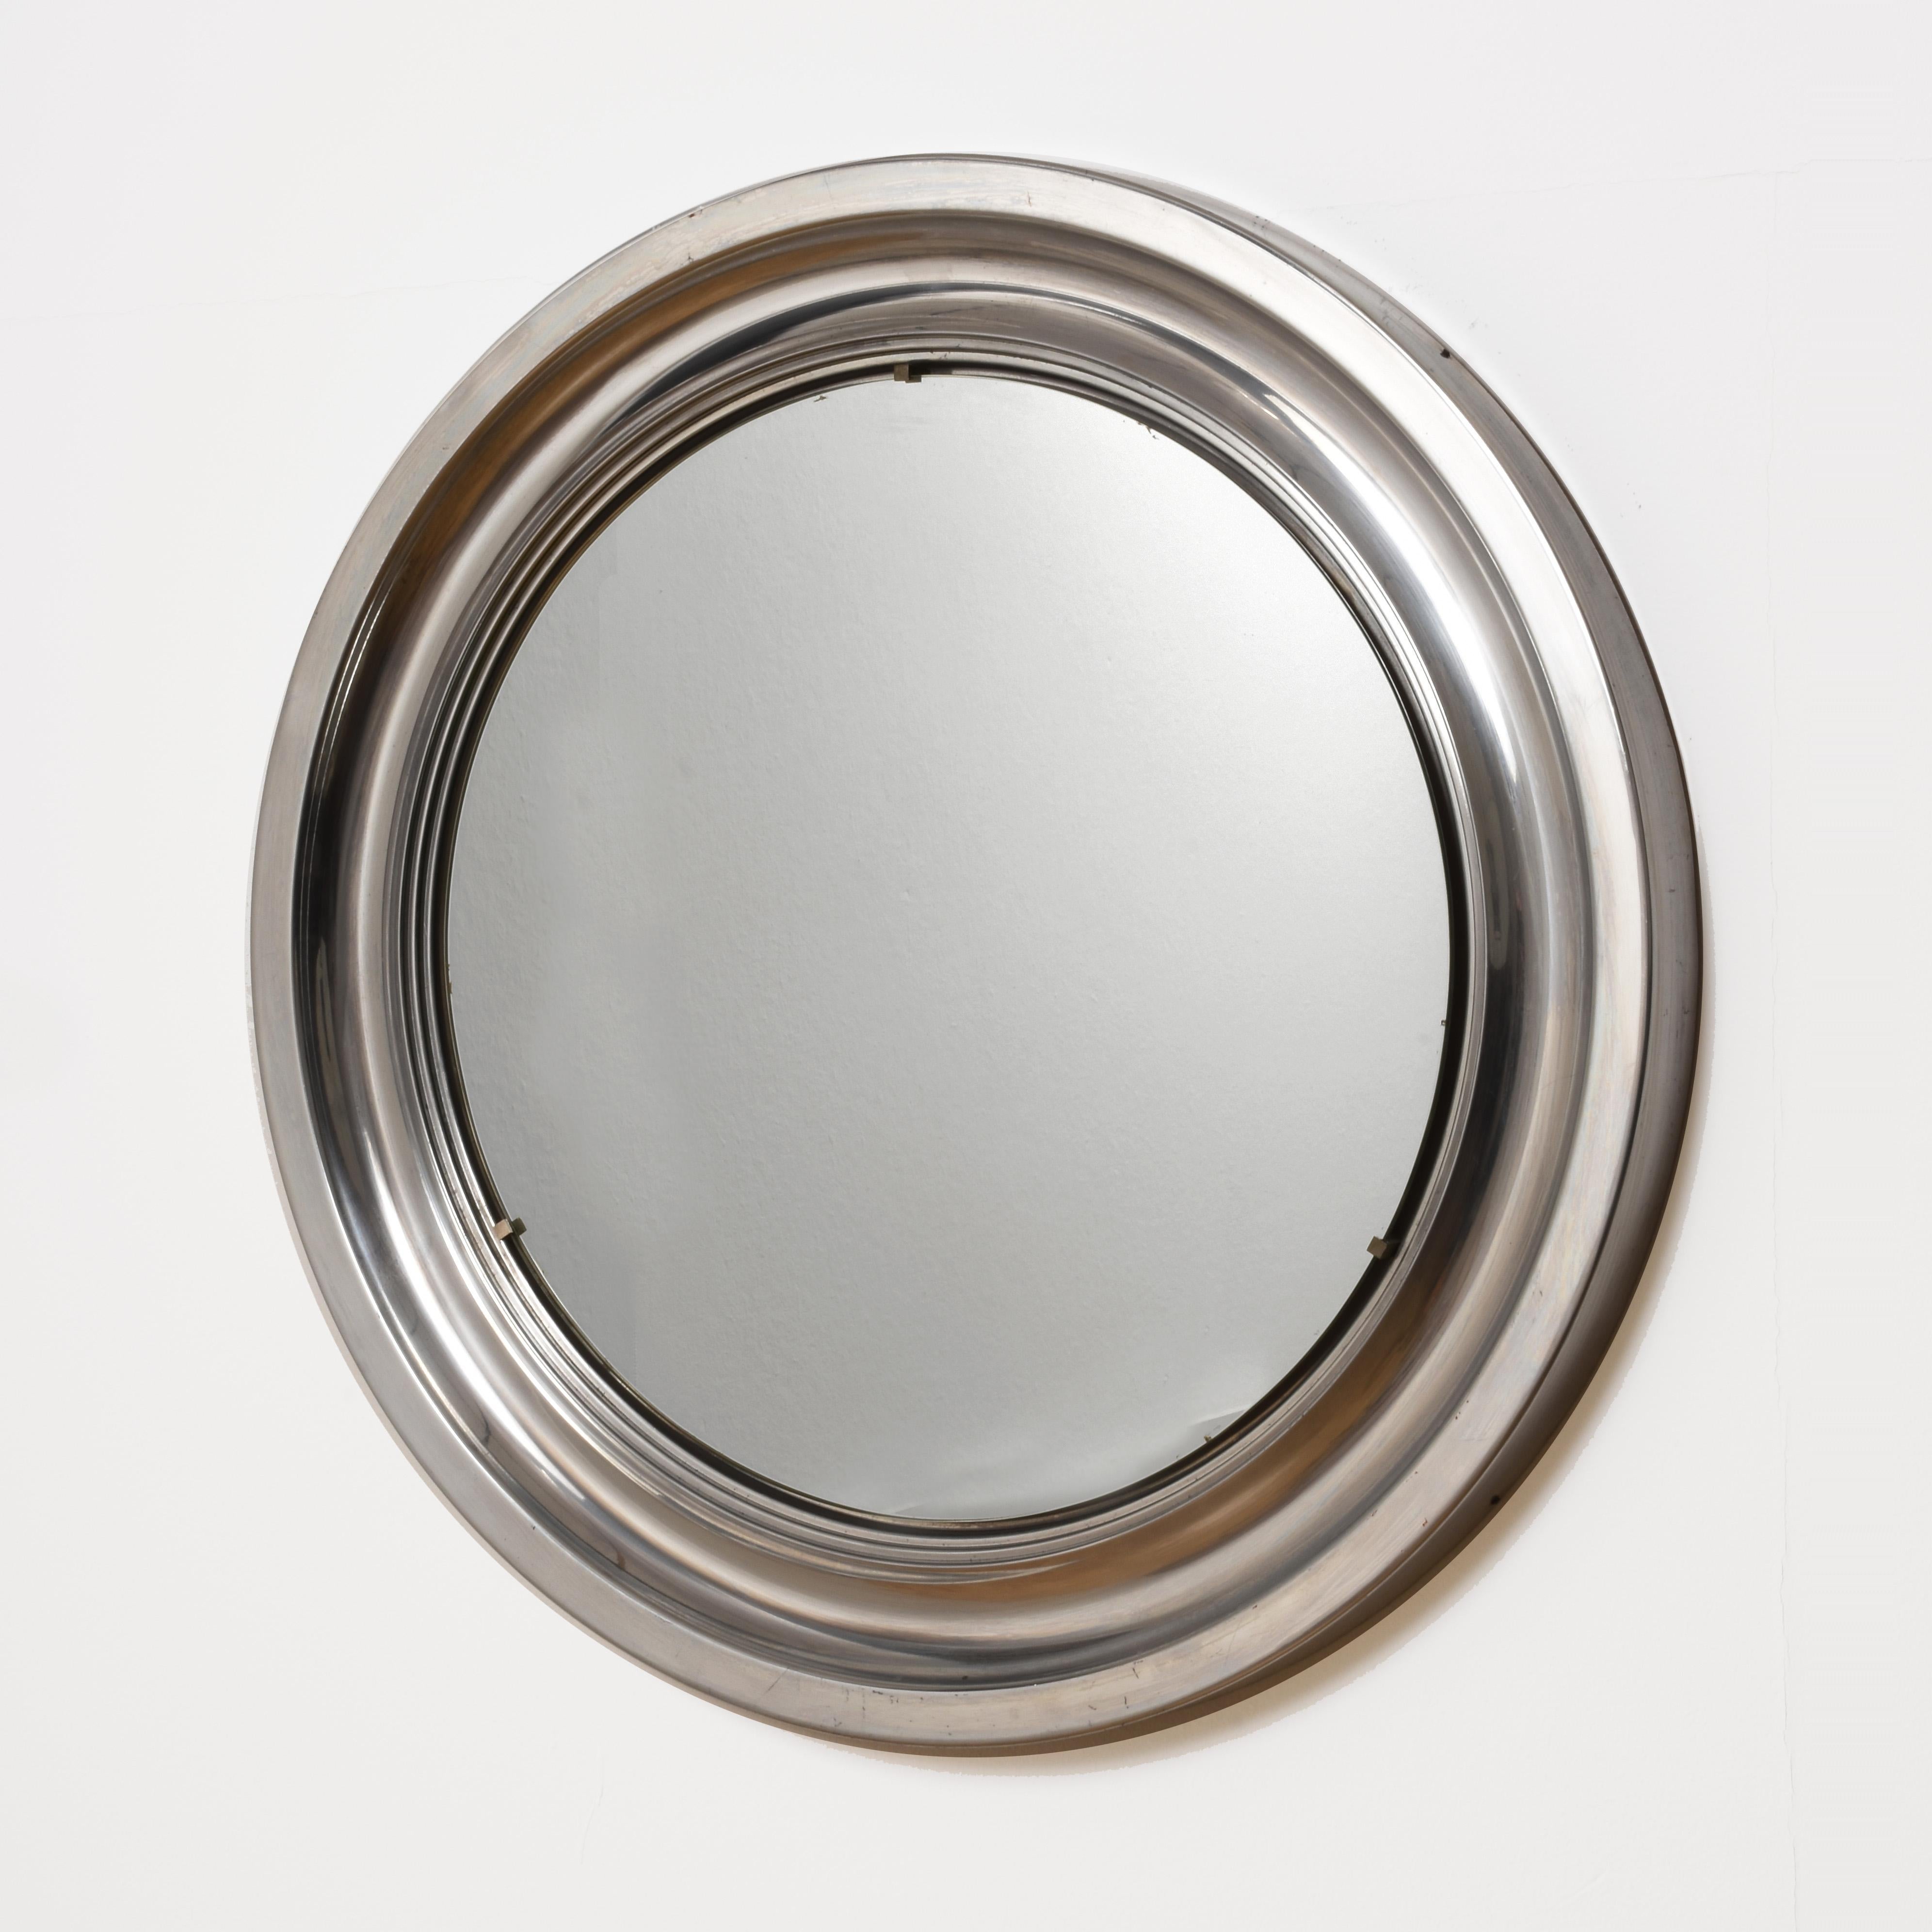 Wonderful Aluminium round mirror attributed to Sergio Mazza for Artemide. This amazing item was produced in Italy during the 1960s.

This piece has a wonderful modernist wavy aluminium frame, which has a concave centre creating depth and